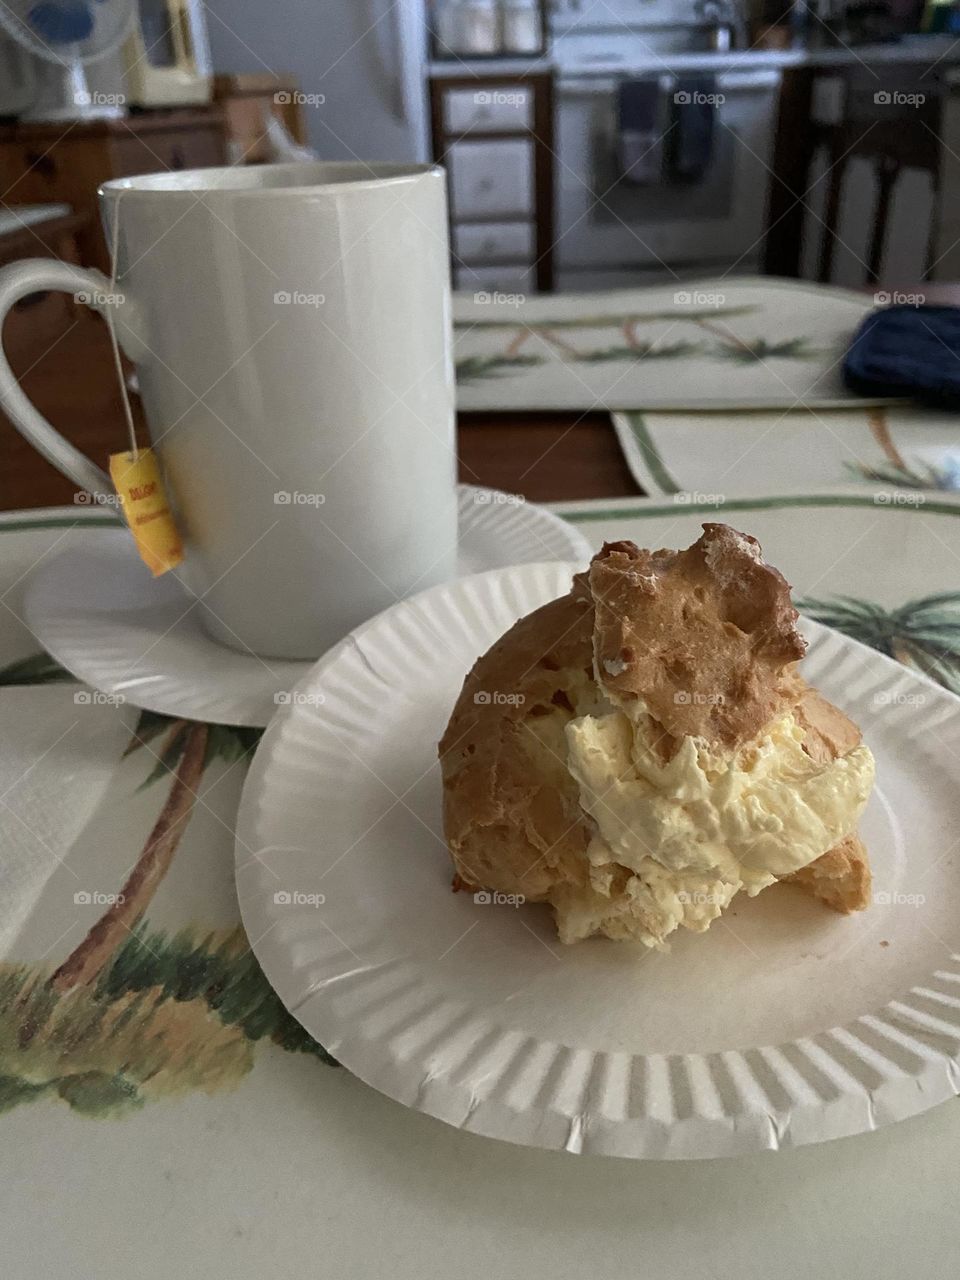 One of my mom’s famous cream puffs. The cream is out of this world but made with skim milk so you don’t have to feel too guilty eating it. 